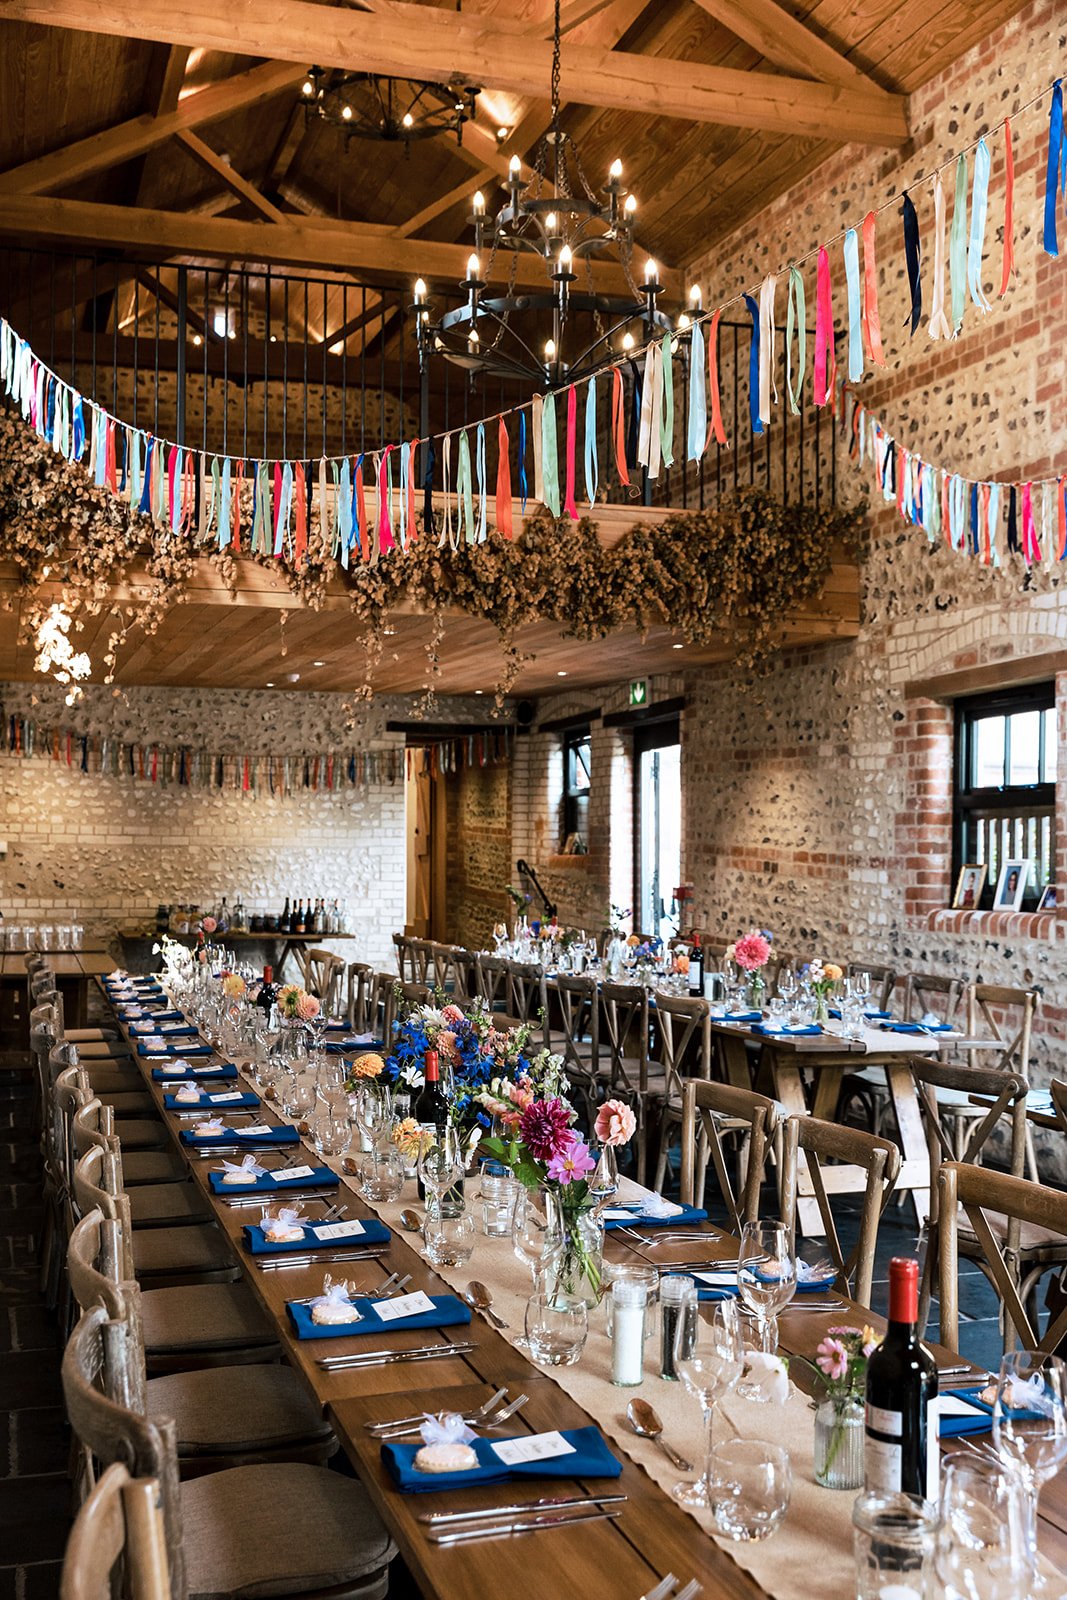 Rustic barn decorated and set up for a wedding breakfast